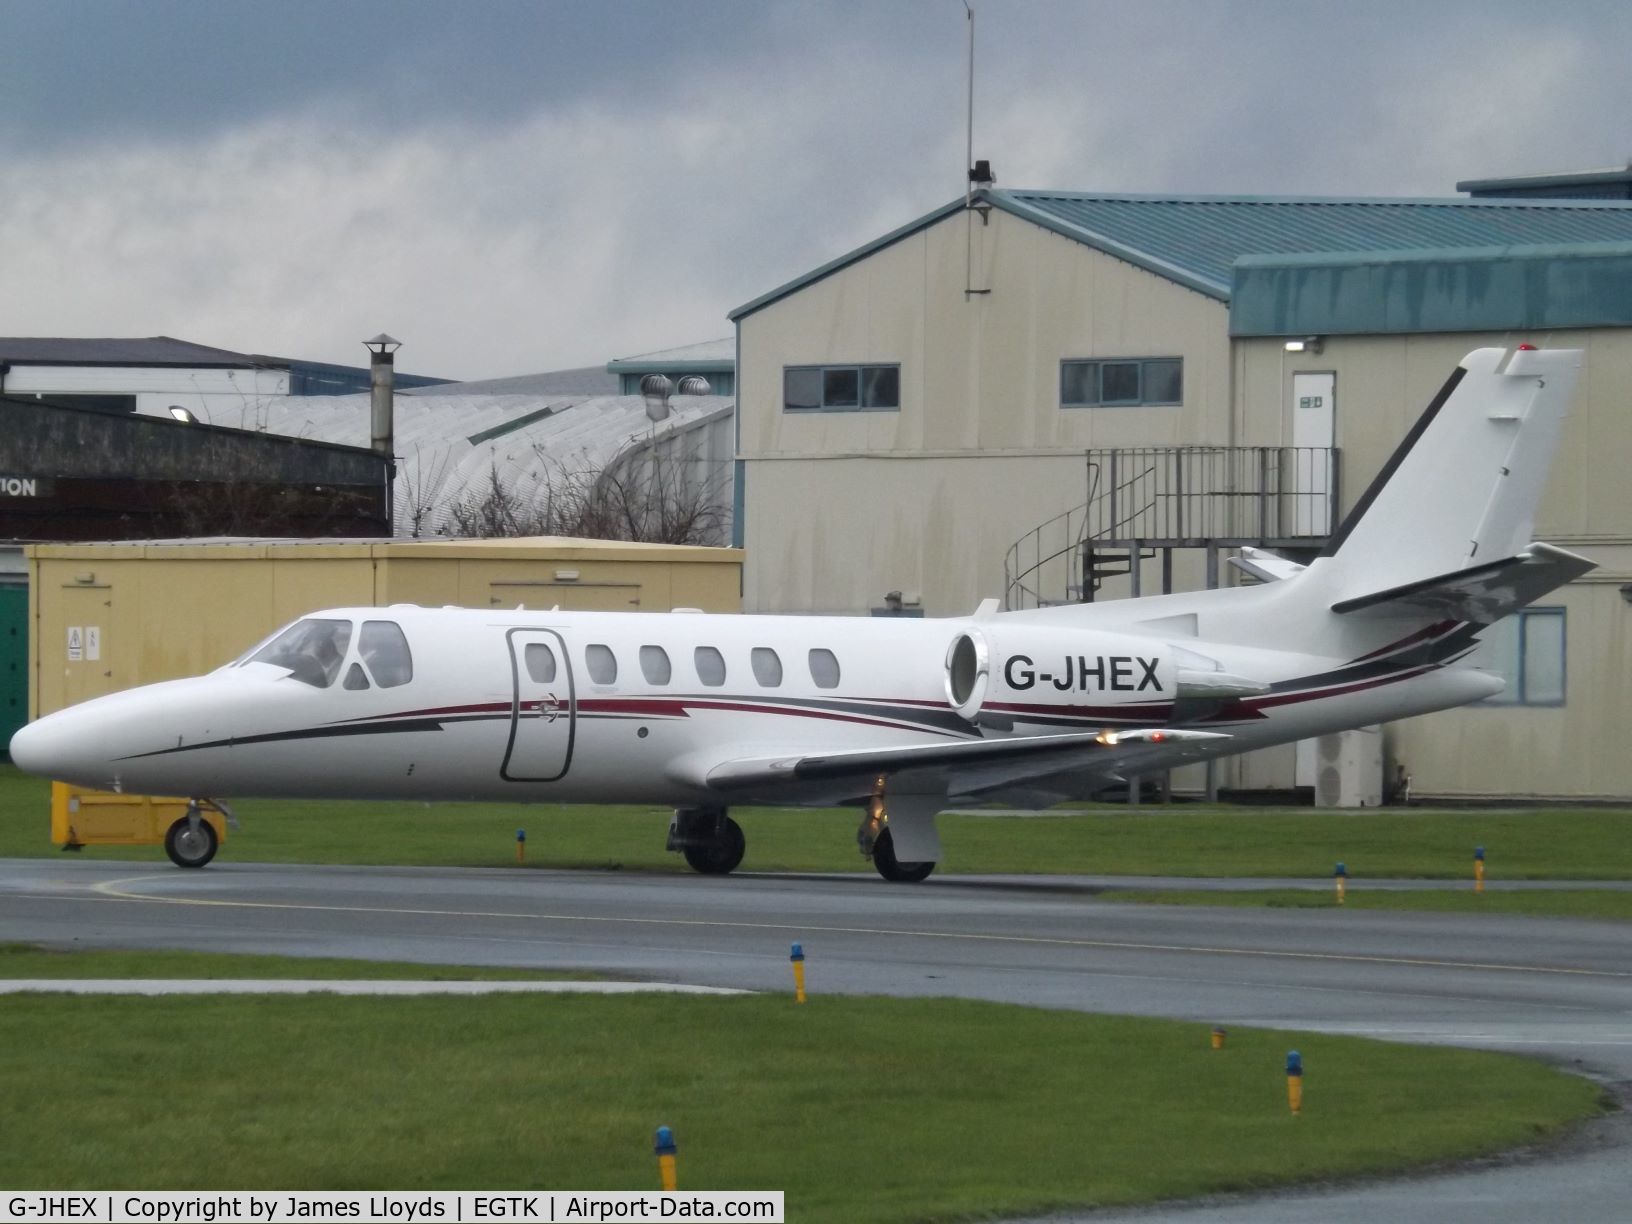 G-JHEX, 2006 Cessna 550 Citation Bravo C/N 550-1130, Taxing out from Oxford Airport for a training flight to/from Teesside Airport.